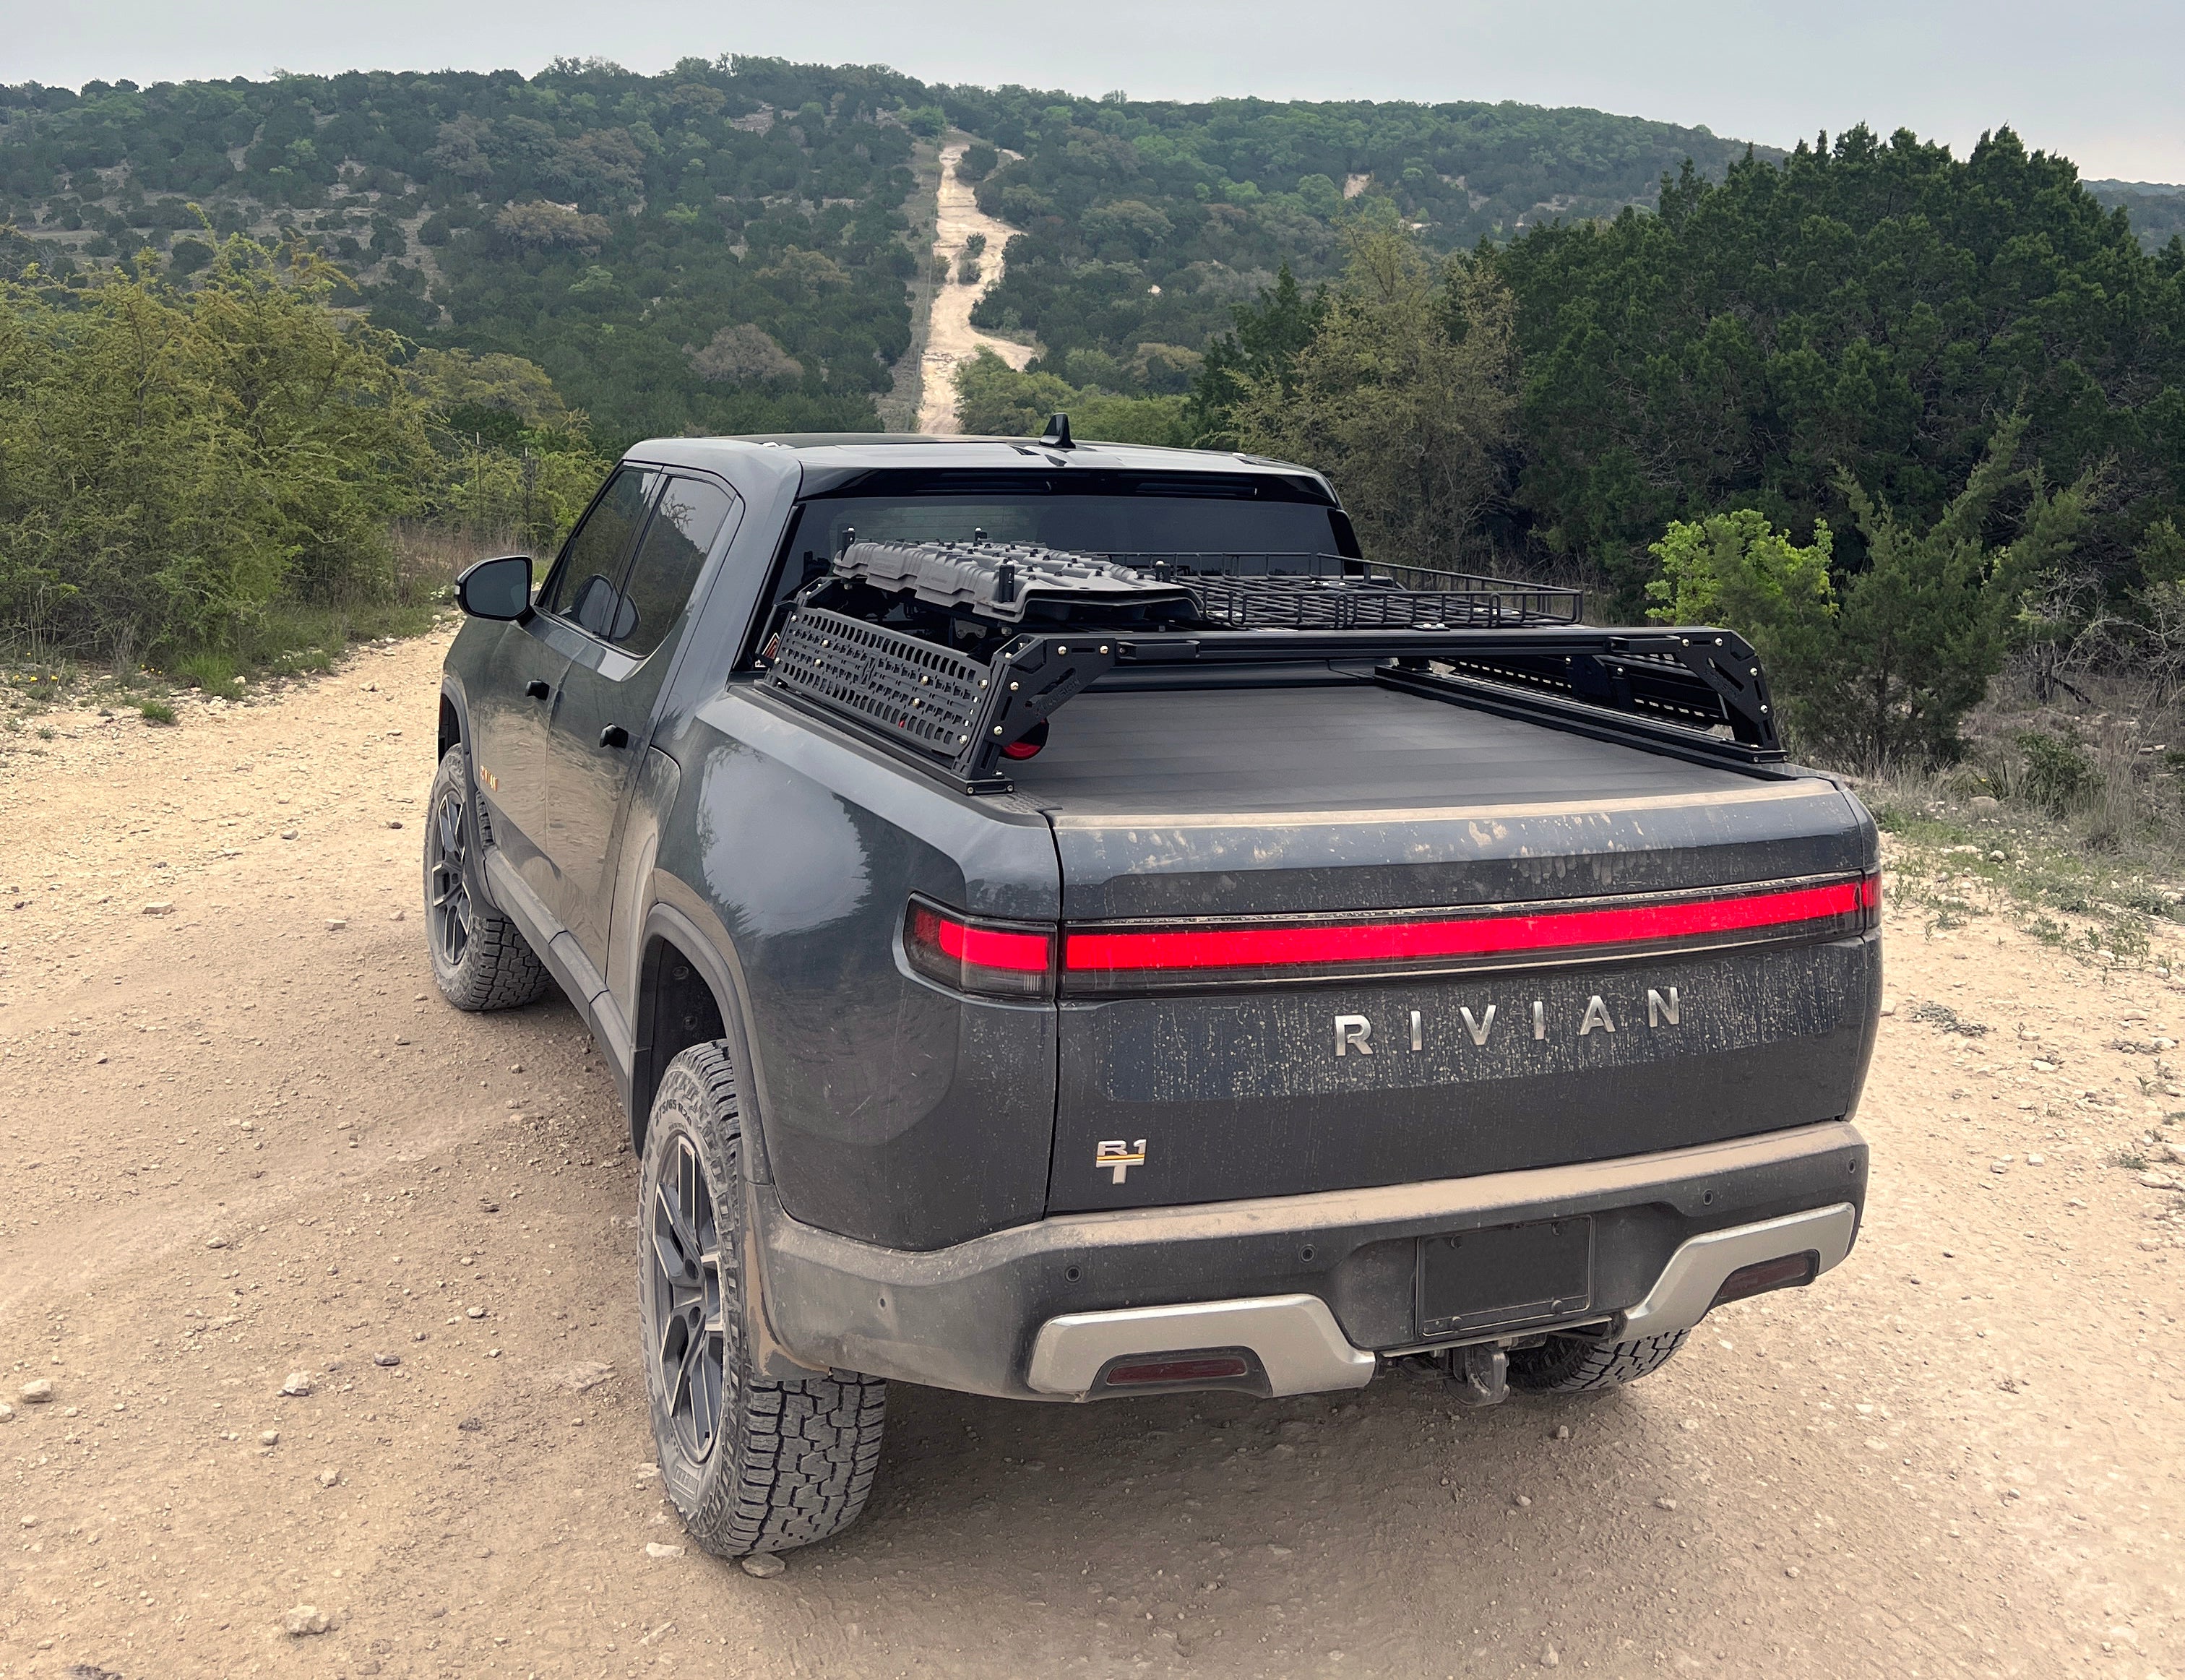 XTR Bed Rack for the Rivian R1T